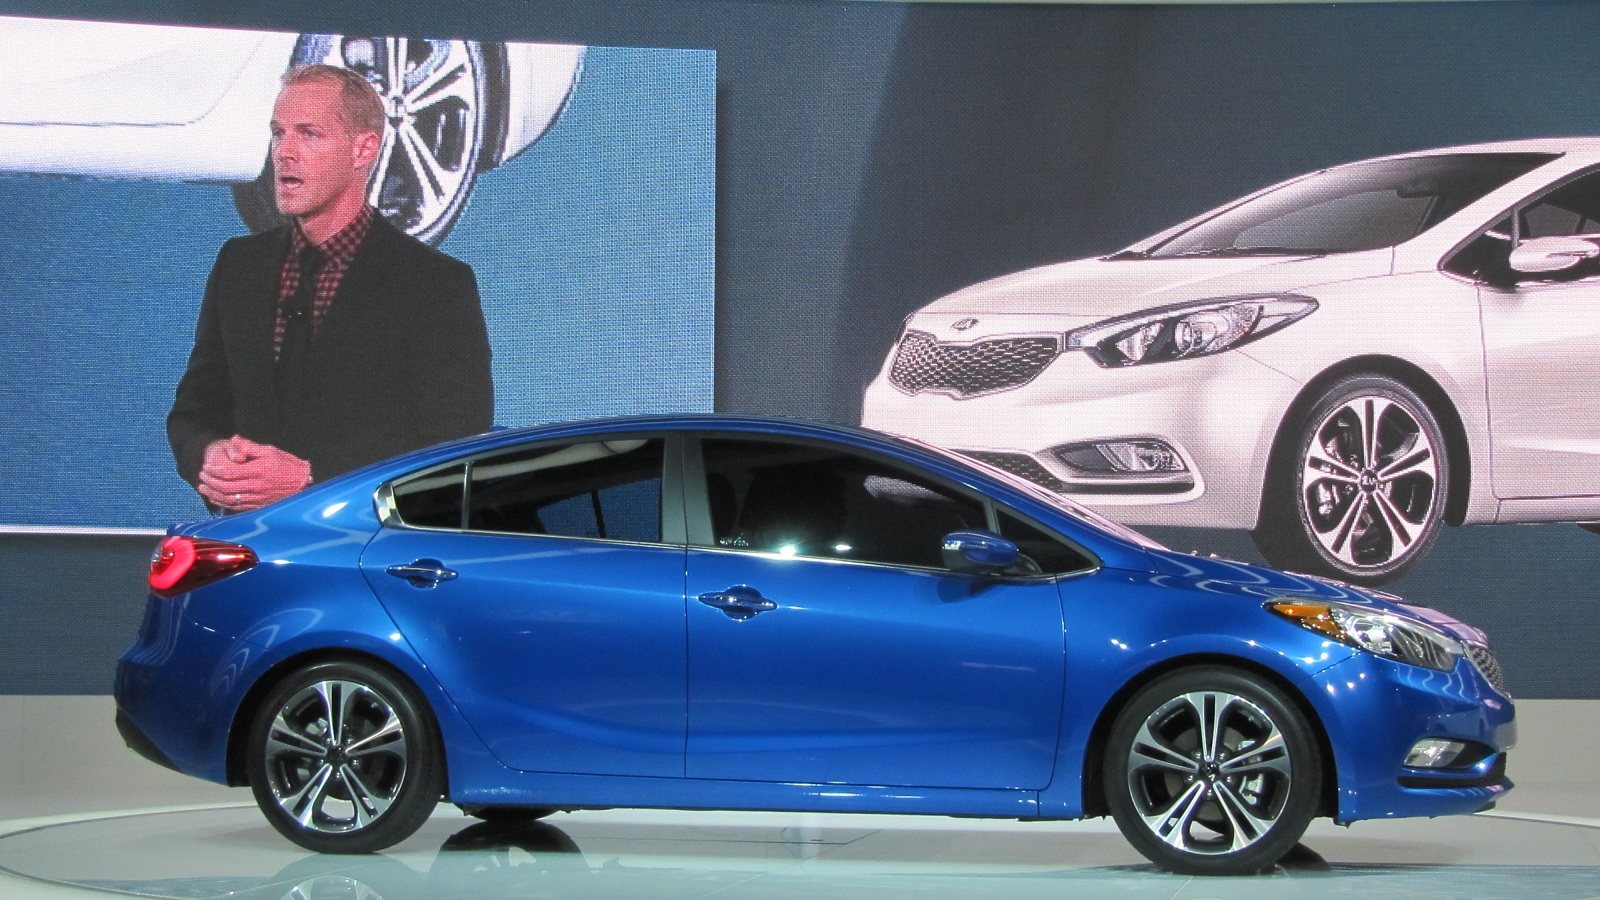 2014 Kia Forte sedan, launched at the 2012 Los Angeles Auto Show